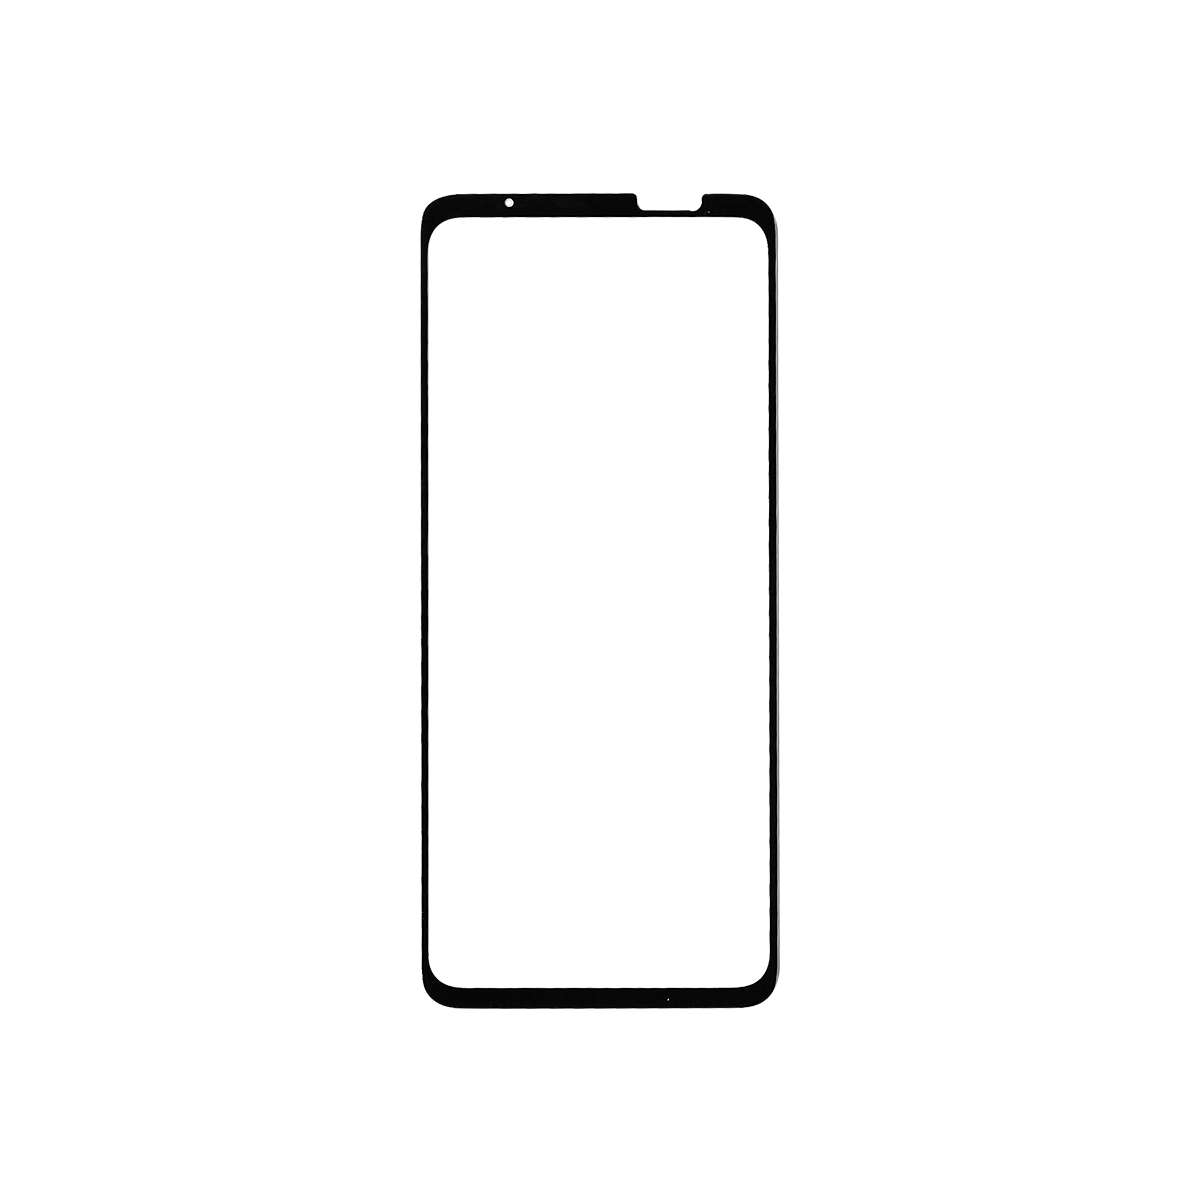 sprig full cover tempered glass screen protector for asus rog 6 (black)